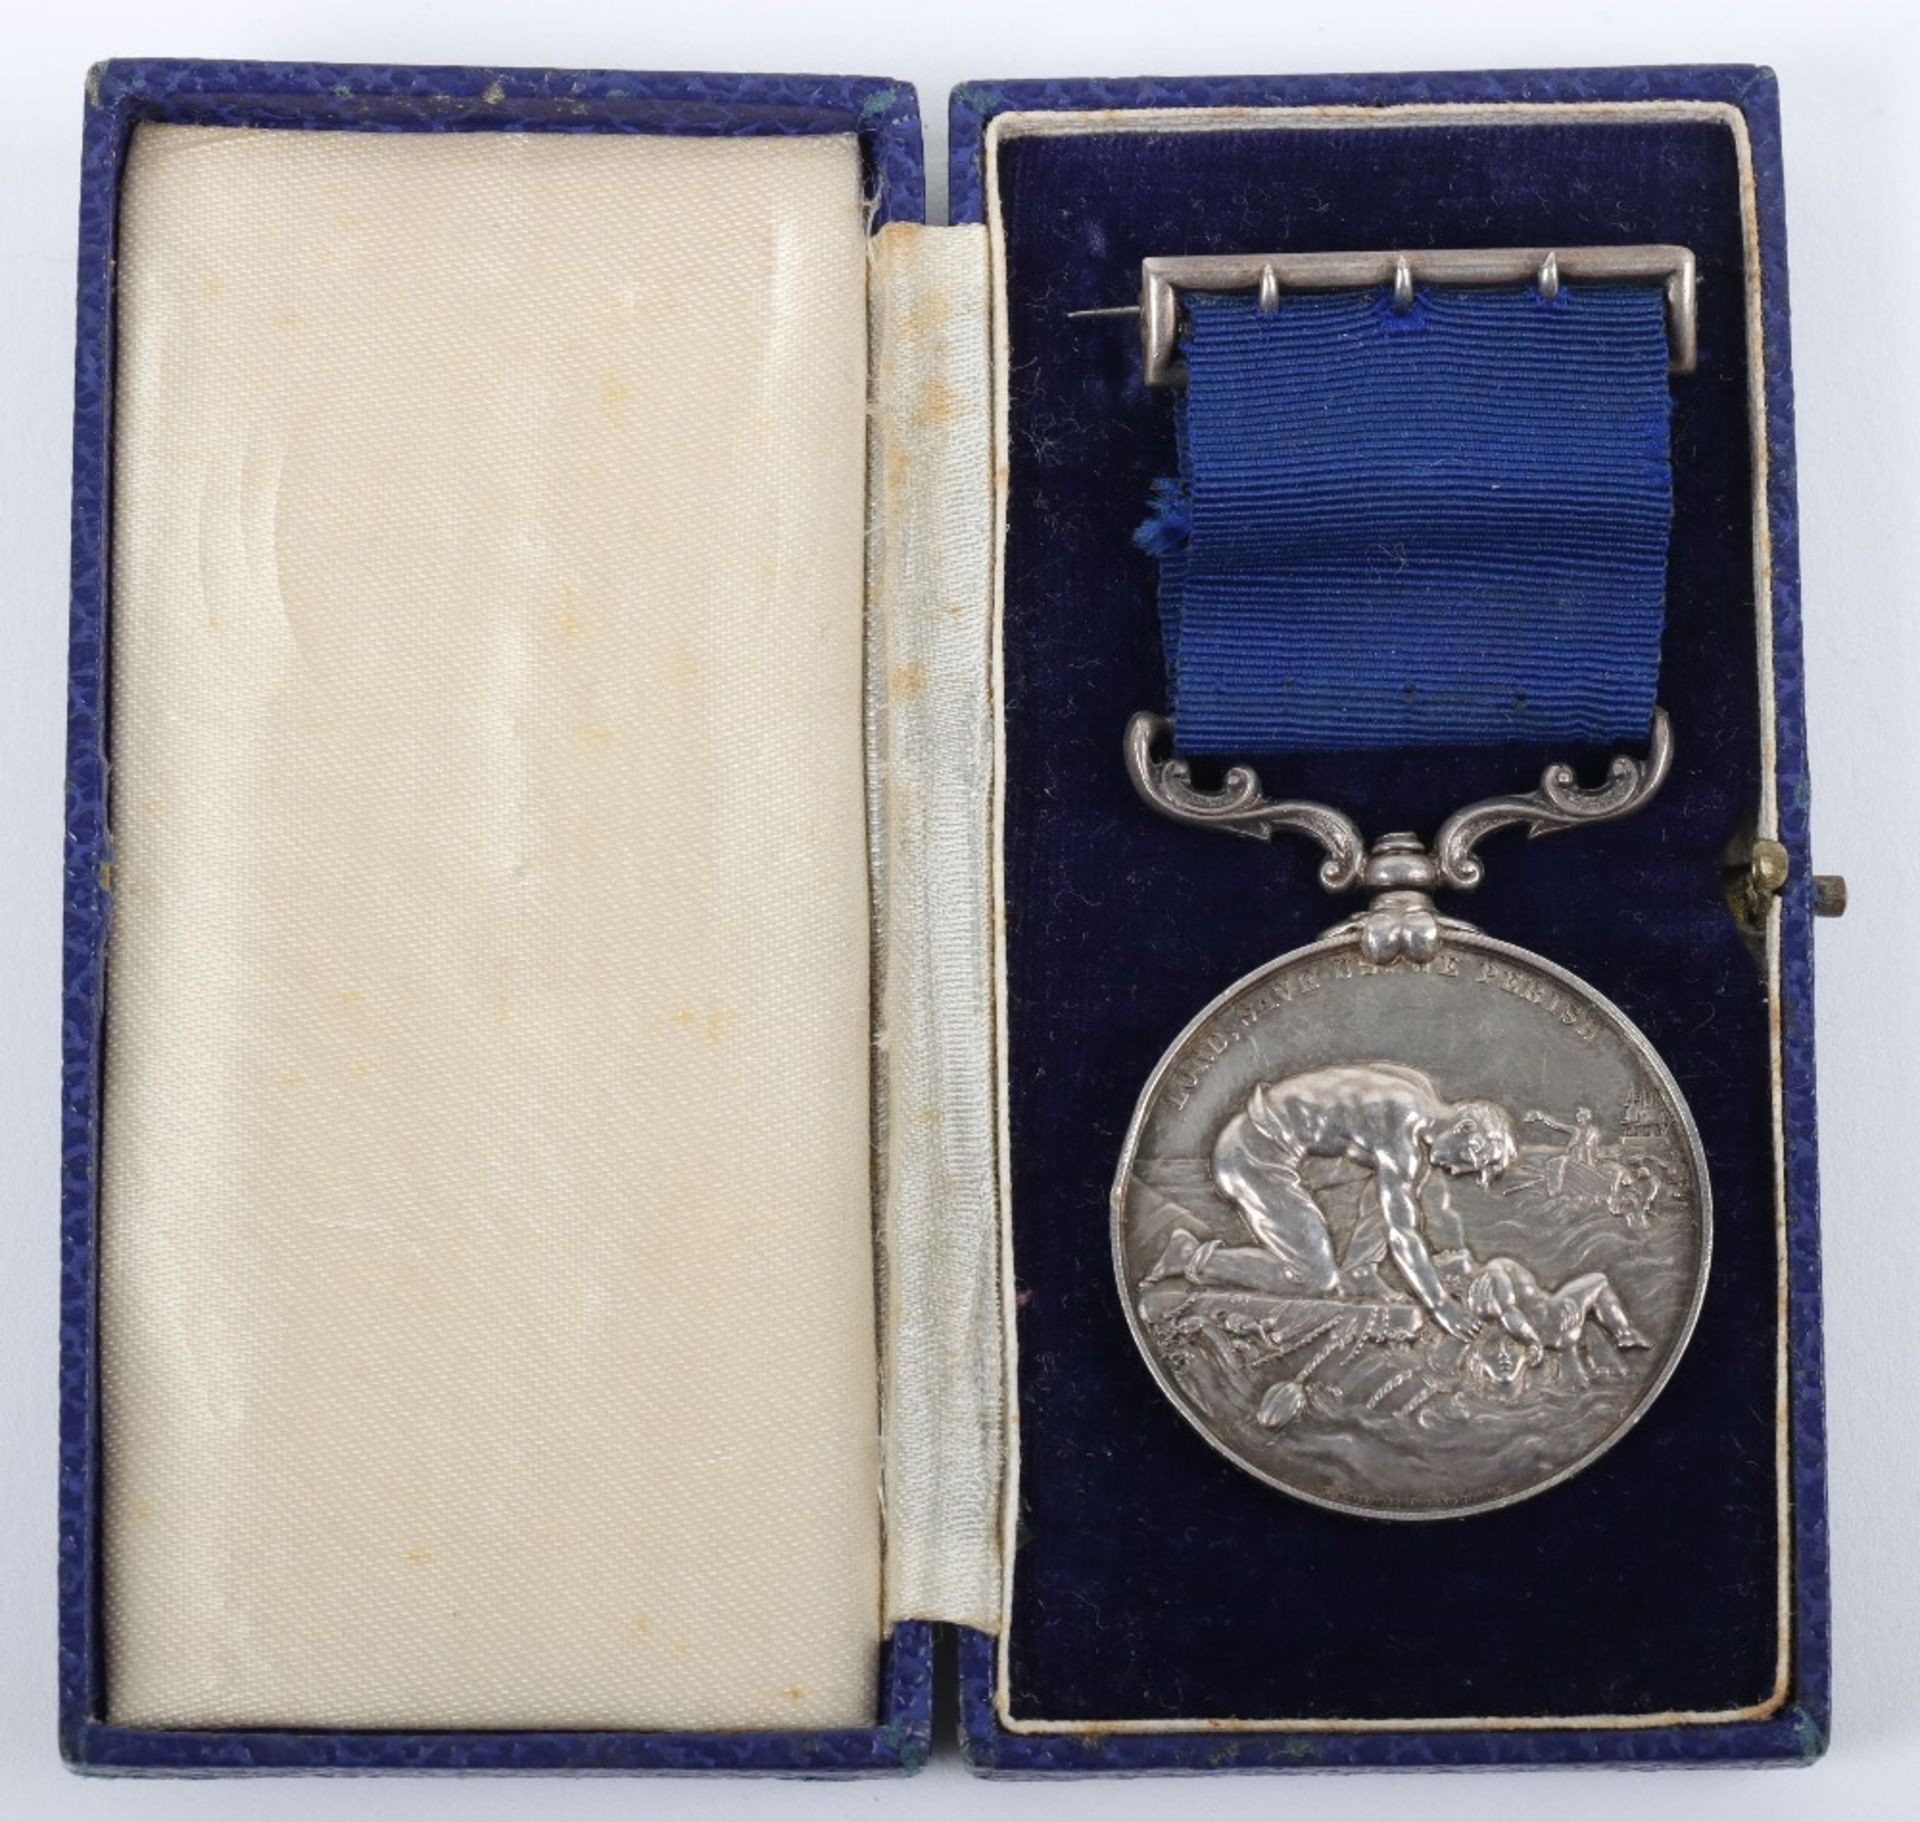 A Liverpool Shipwreck and Humane Society’s Marine Medal